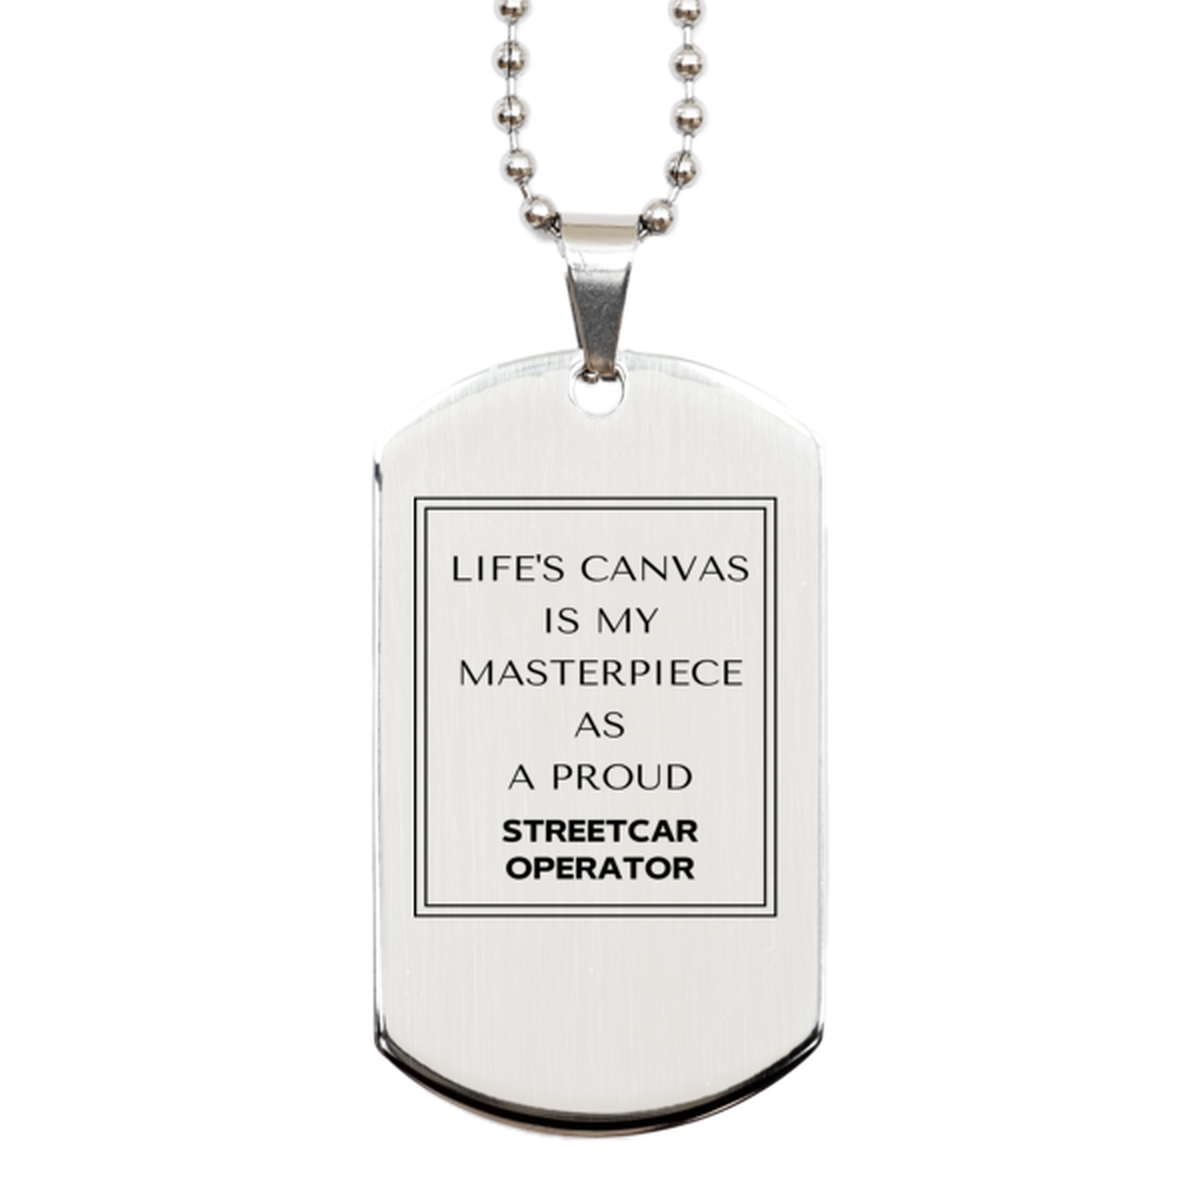 Proud Streetcar Operator Gifts, Life's canvas is my masterpiece, Epic Birthday Christmas Unique Silver Dog Tag For Streetcar Operator, Coworkers, Men, Women, Friends